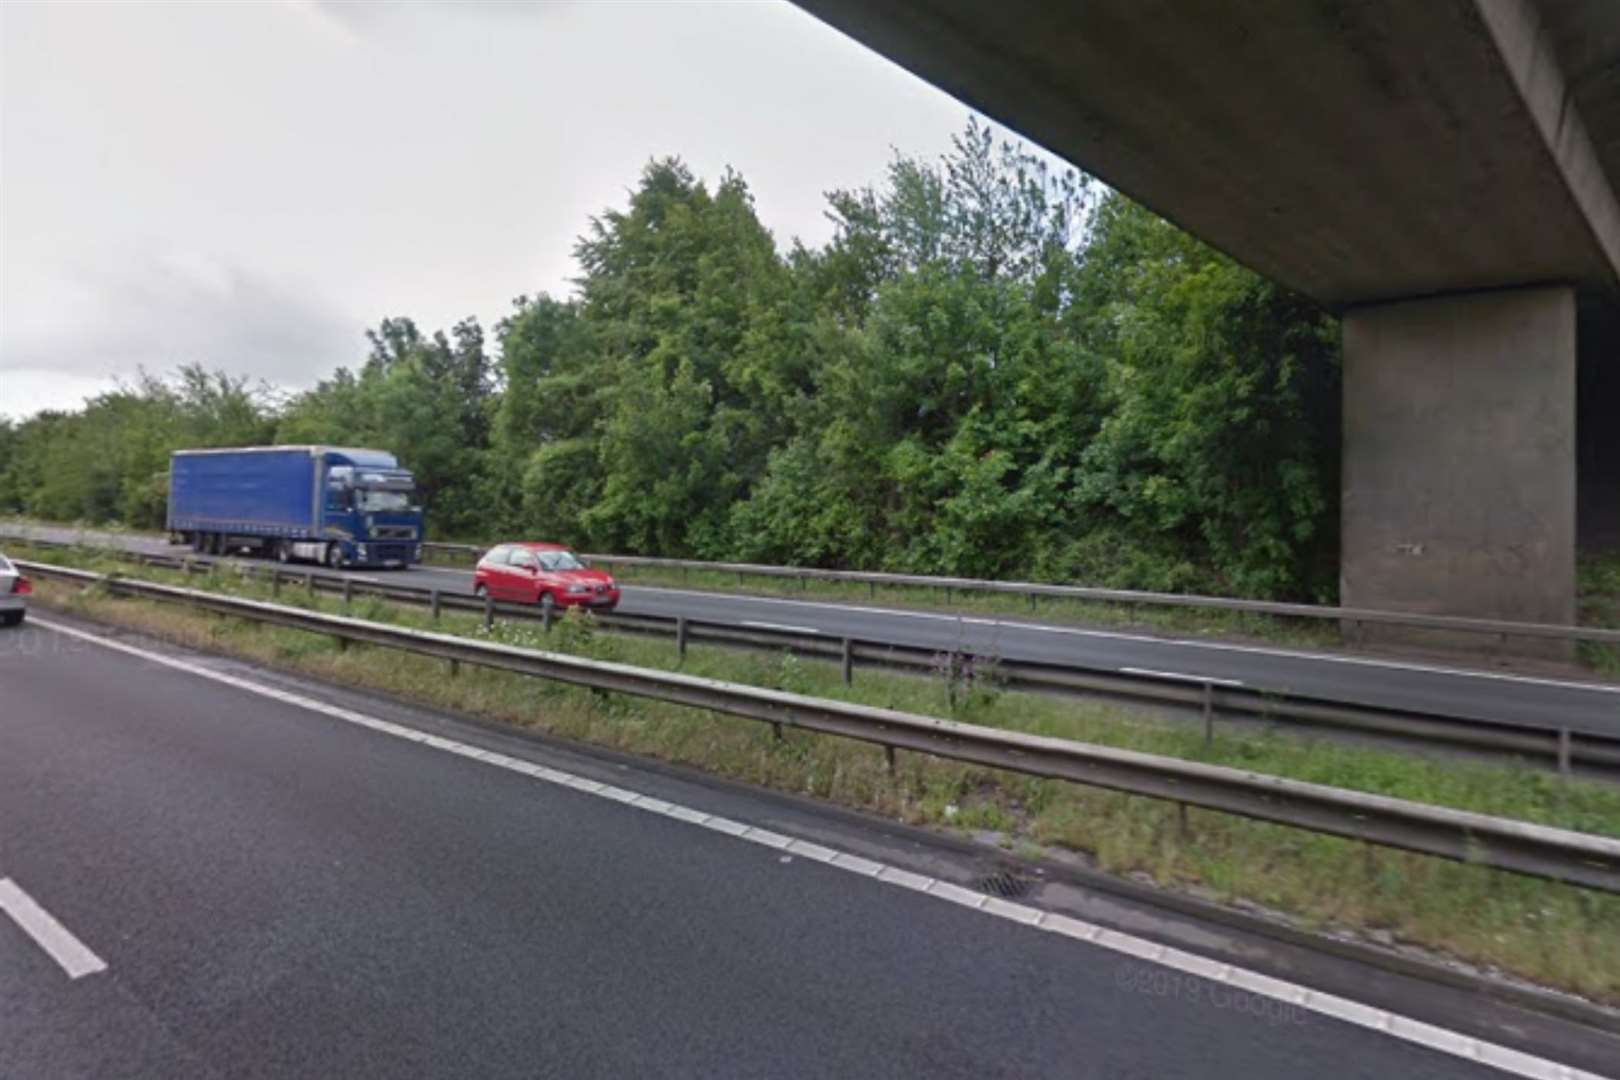 The crash happened on the A2